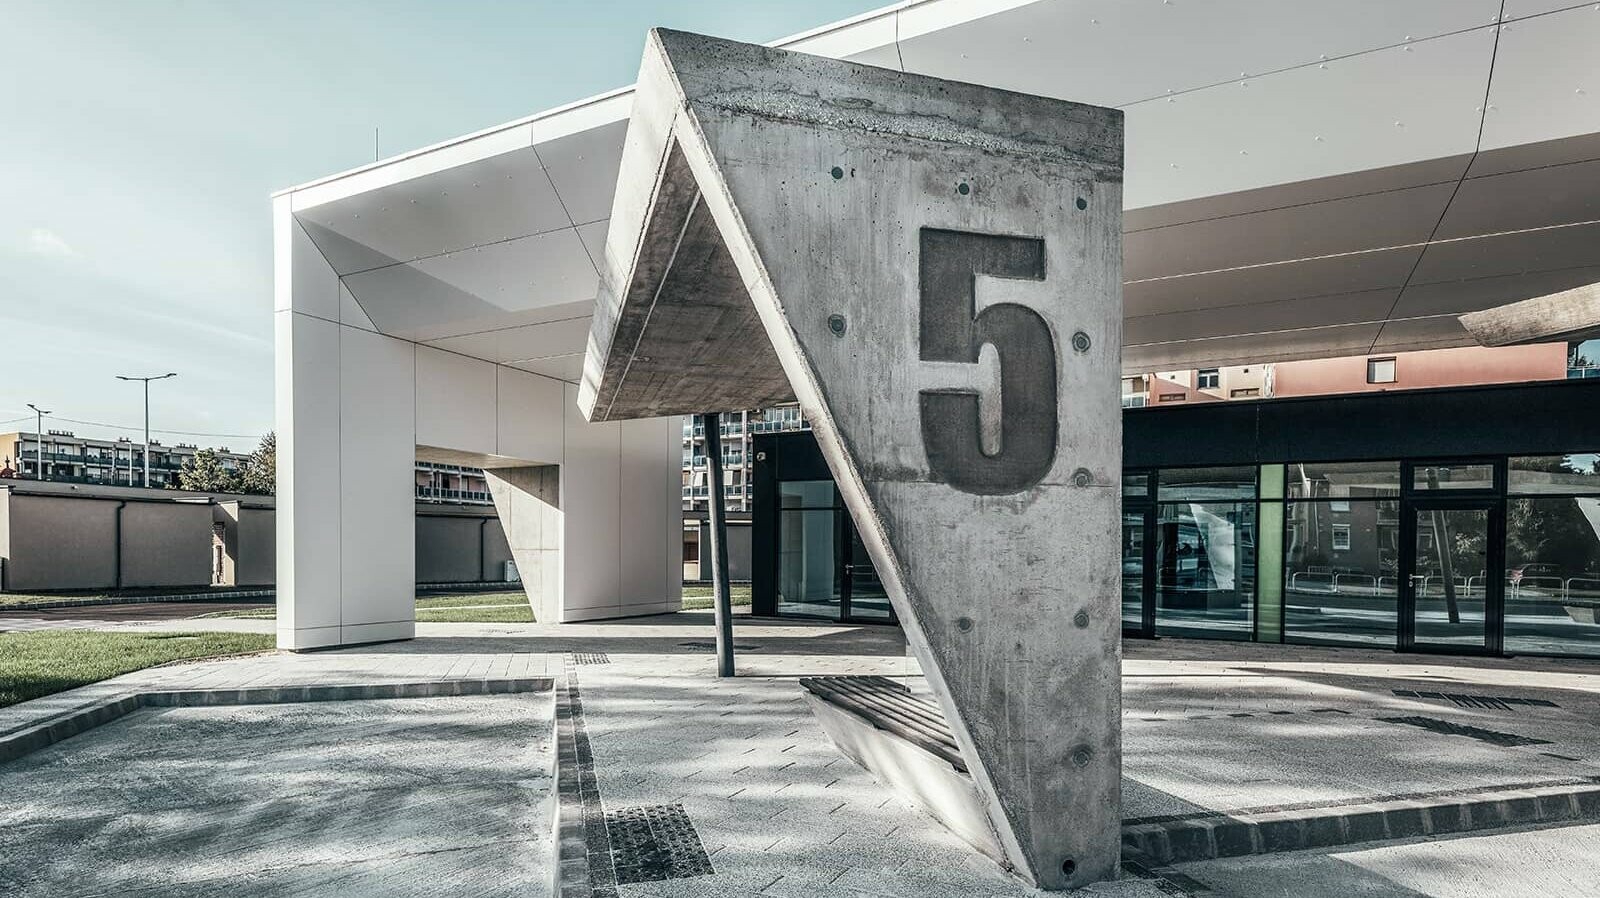 The picture shows a concrete pillar with the number 5. A section of the railway station in Lenti can be seen in the background. You can also see the white façade, which is covered in PREFABOND aluminium composite panels.